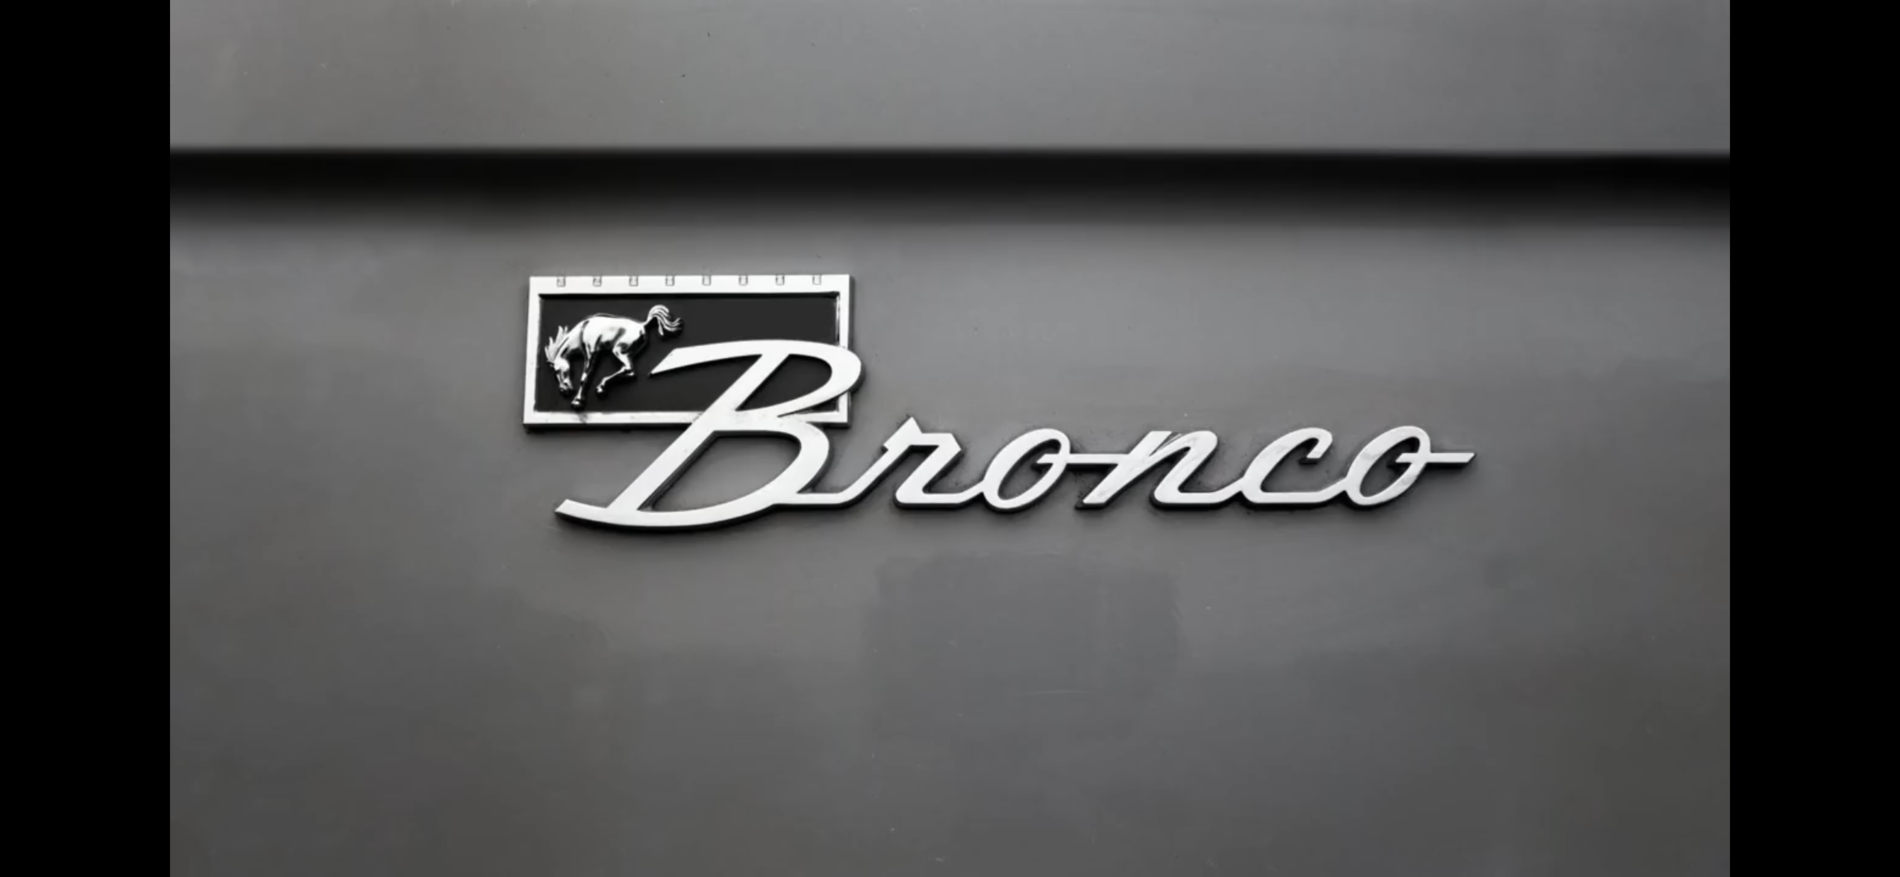 Ford Announces 2021 Bronco World Premiere for Spring 2020 and Shows New